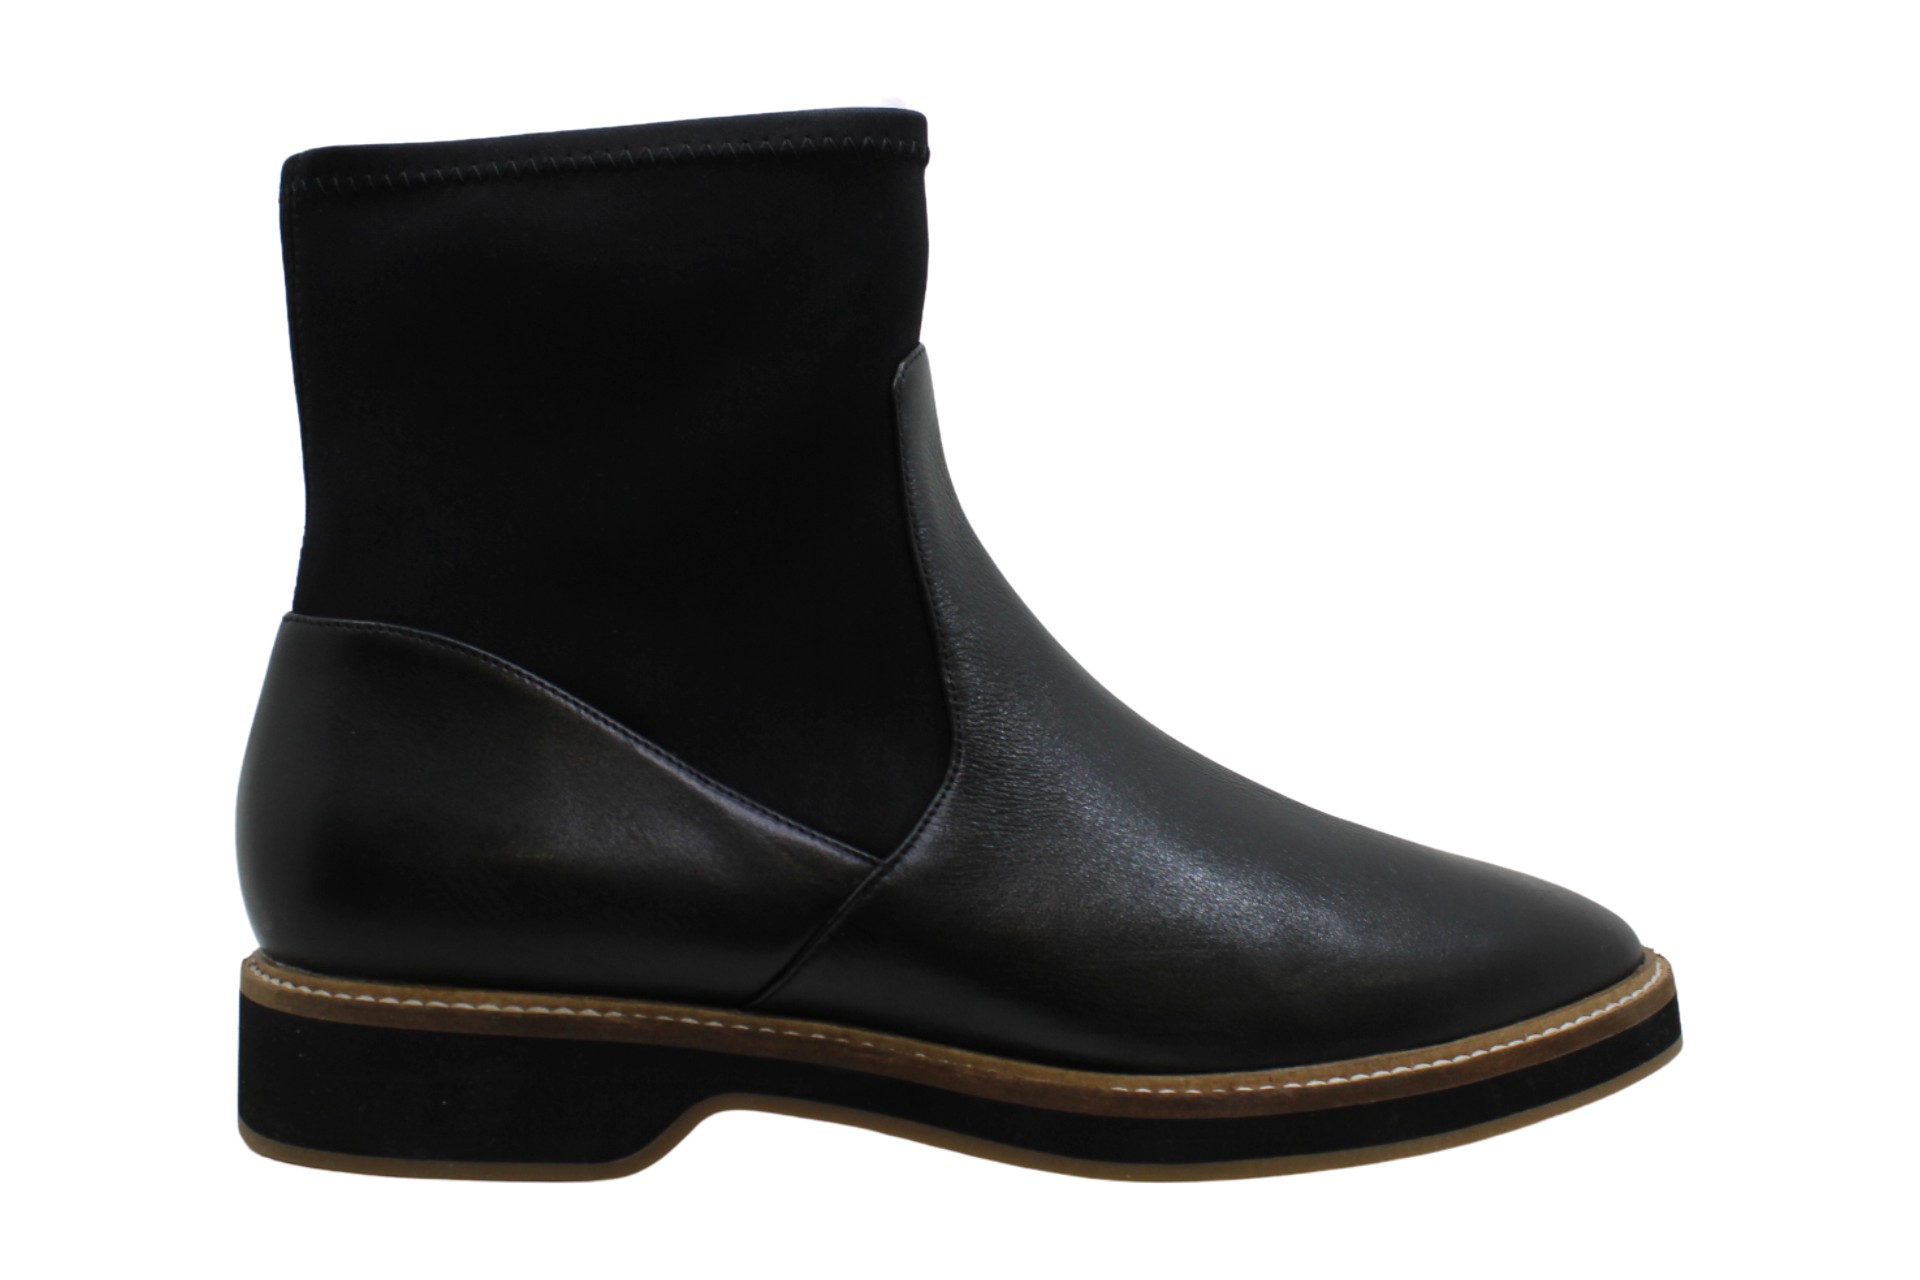 Cole Haan Women's Shoes Go-to Chelsea Bootie Leather, Black Leather